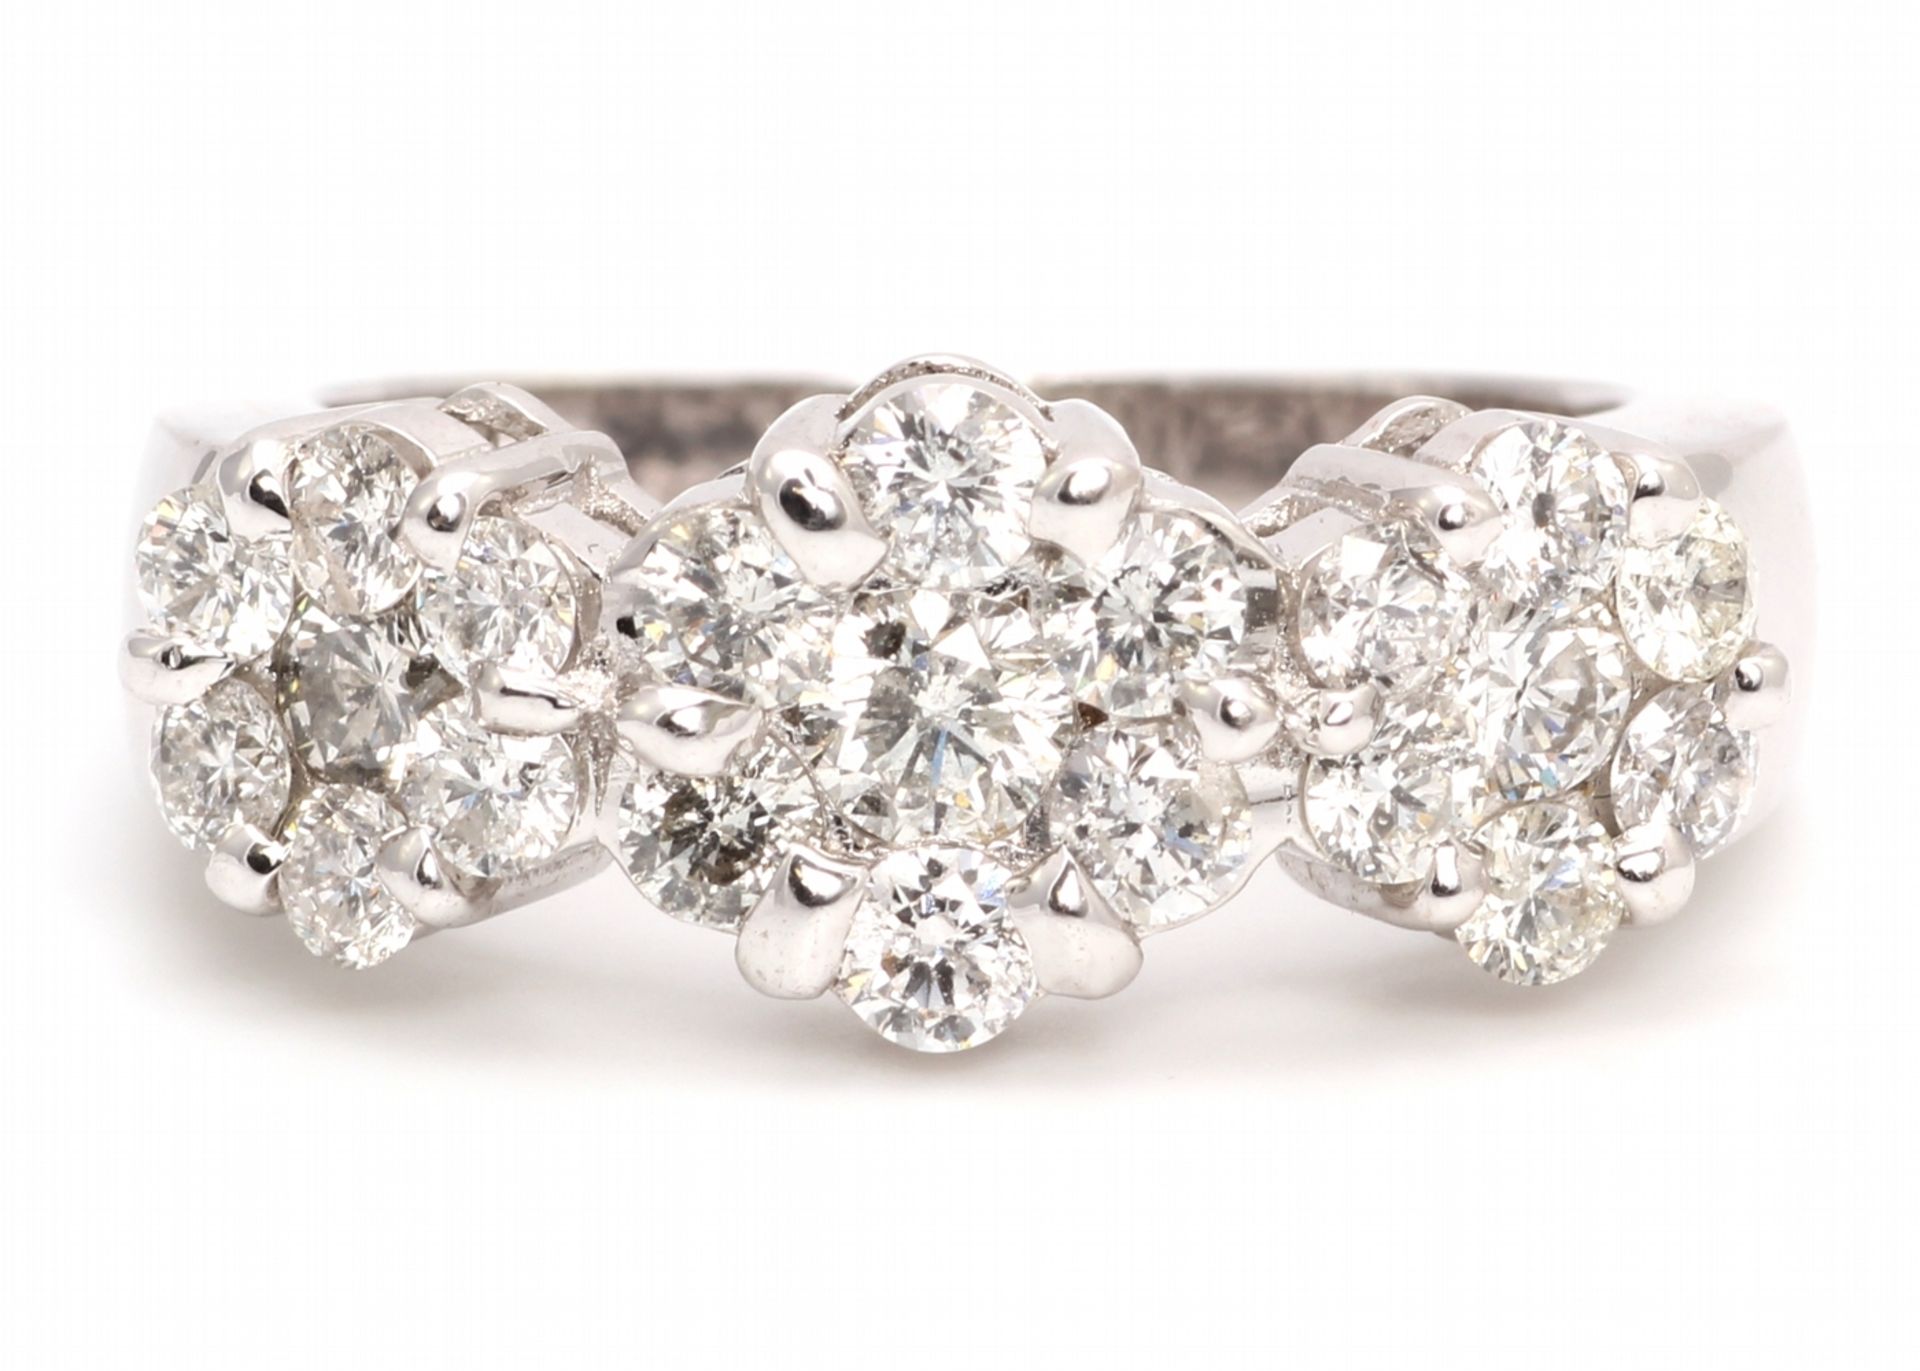 ***£12,700.00*** UNUSED - Certified by GIE 18ct White Gold Flower Cluster Diamond Ring 1.50